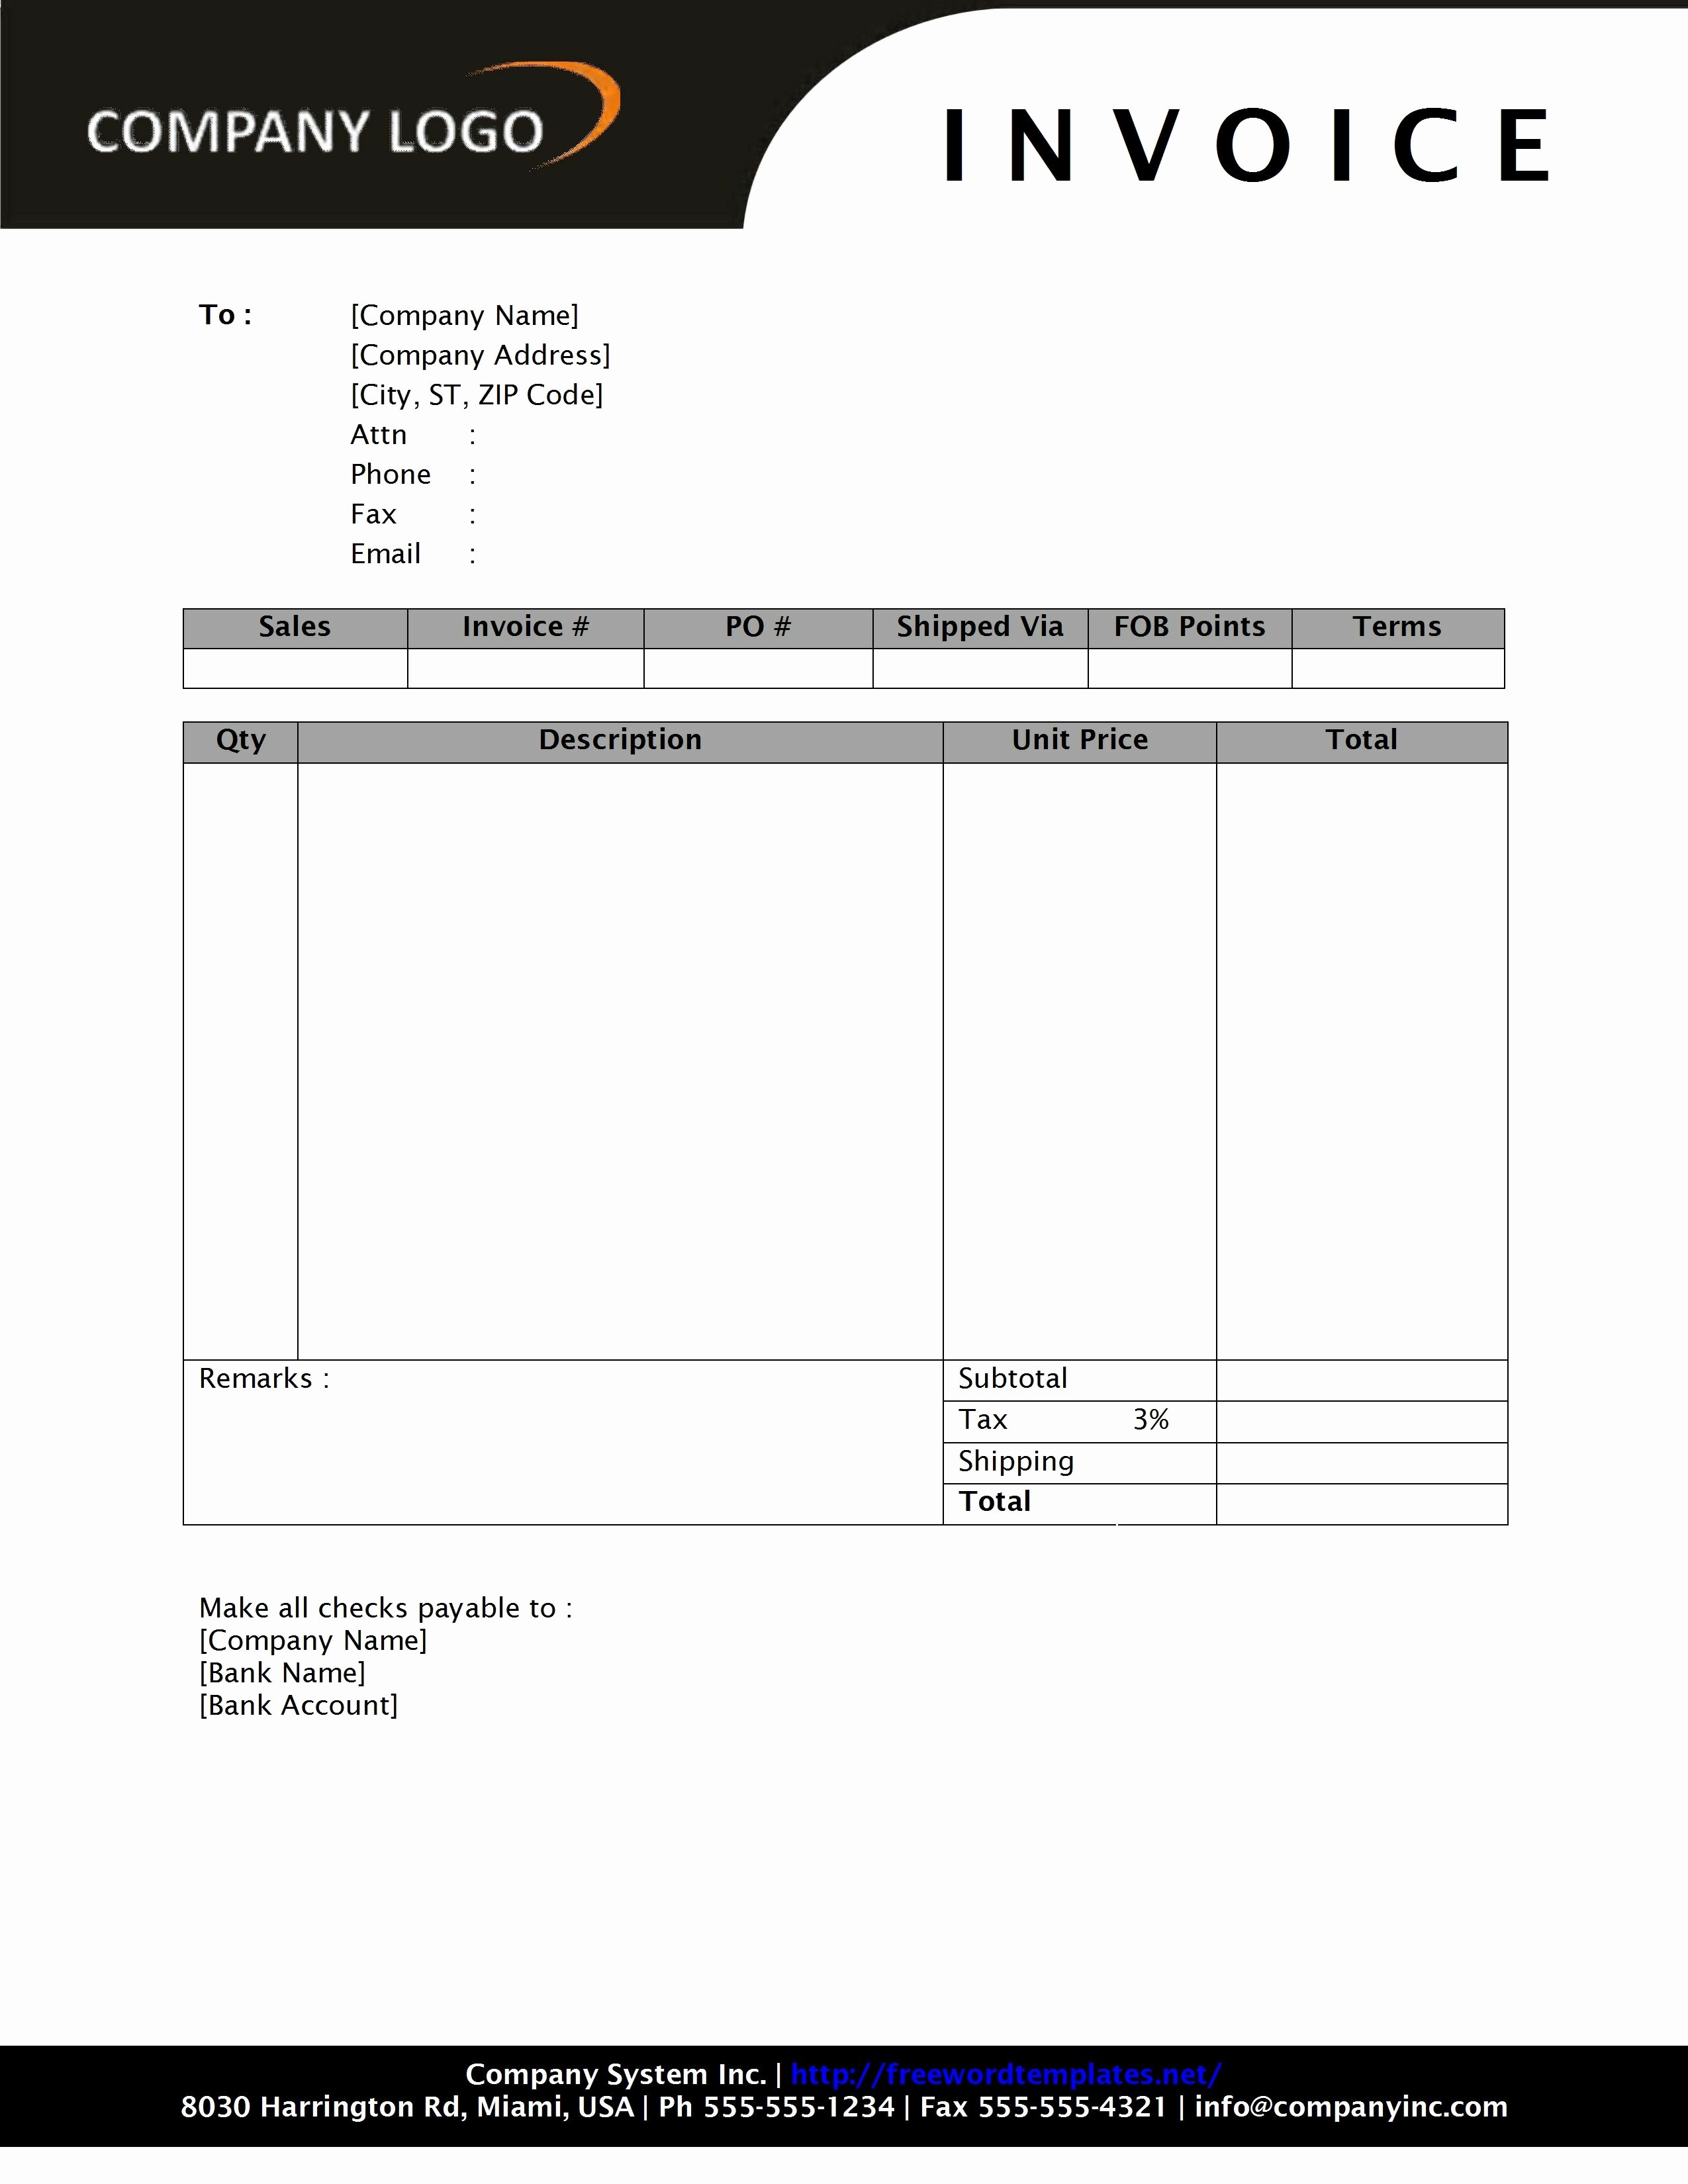 Microsoft Word Invoice Templates Free Inspirational General Sales Invoice